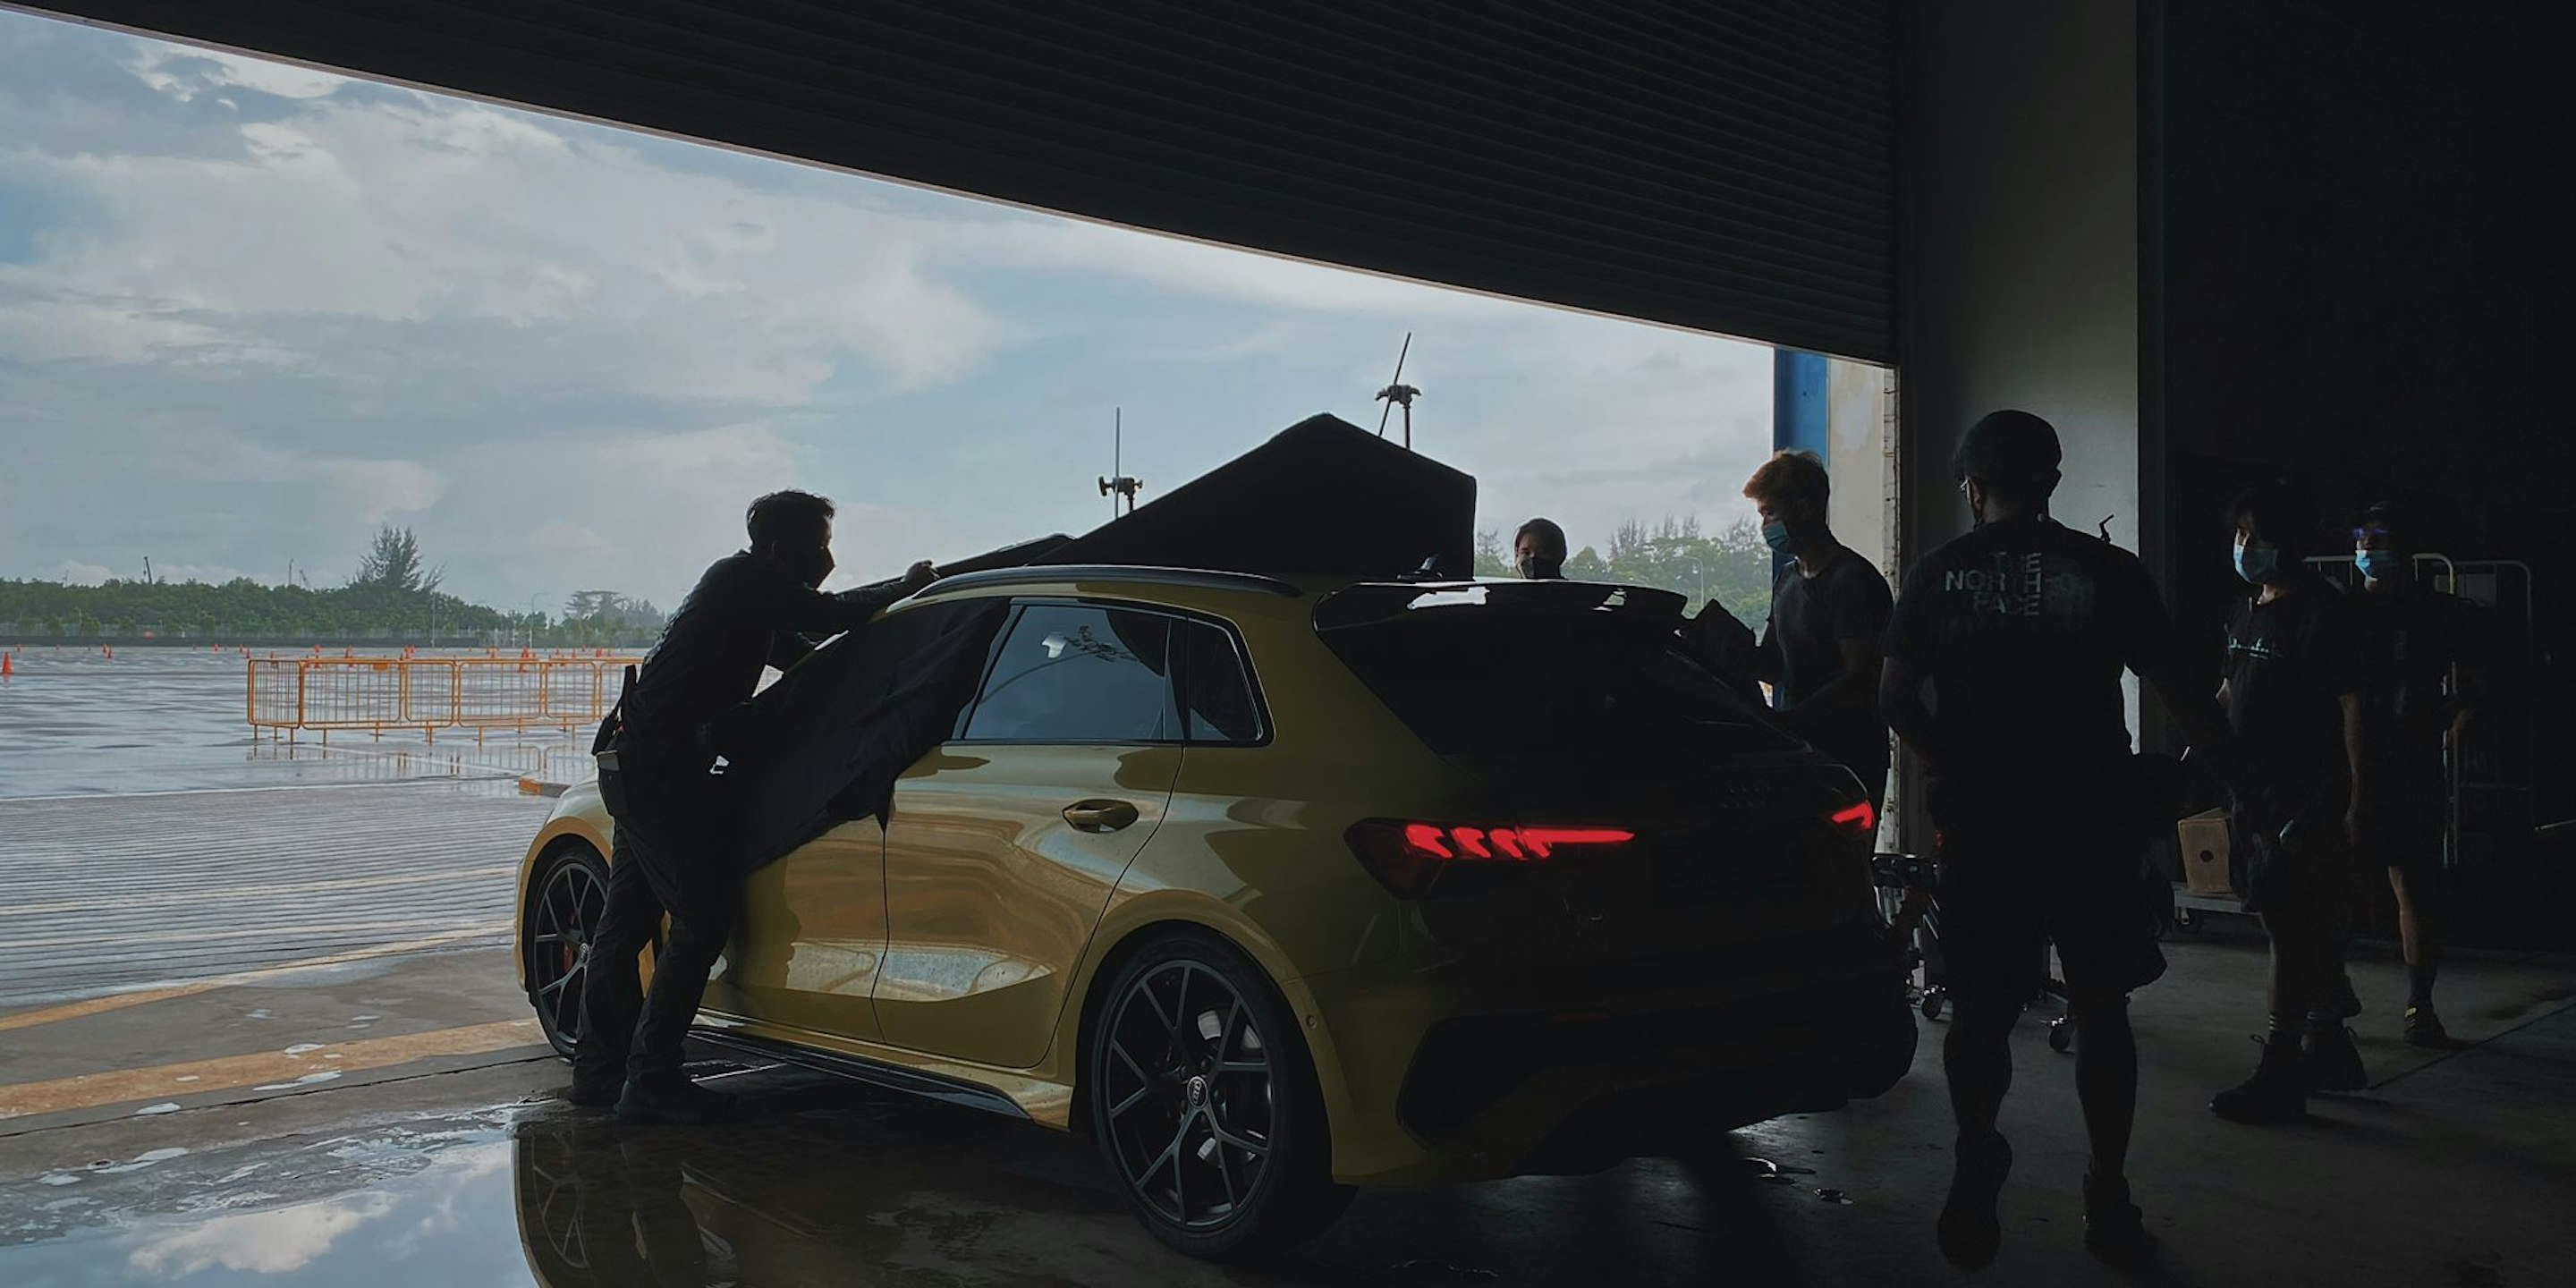 BTS | electriclime° partner with BBDO Singapore to bring the launch of the new Audi RS3 to life.